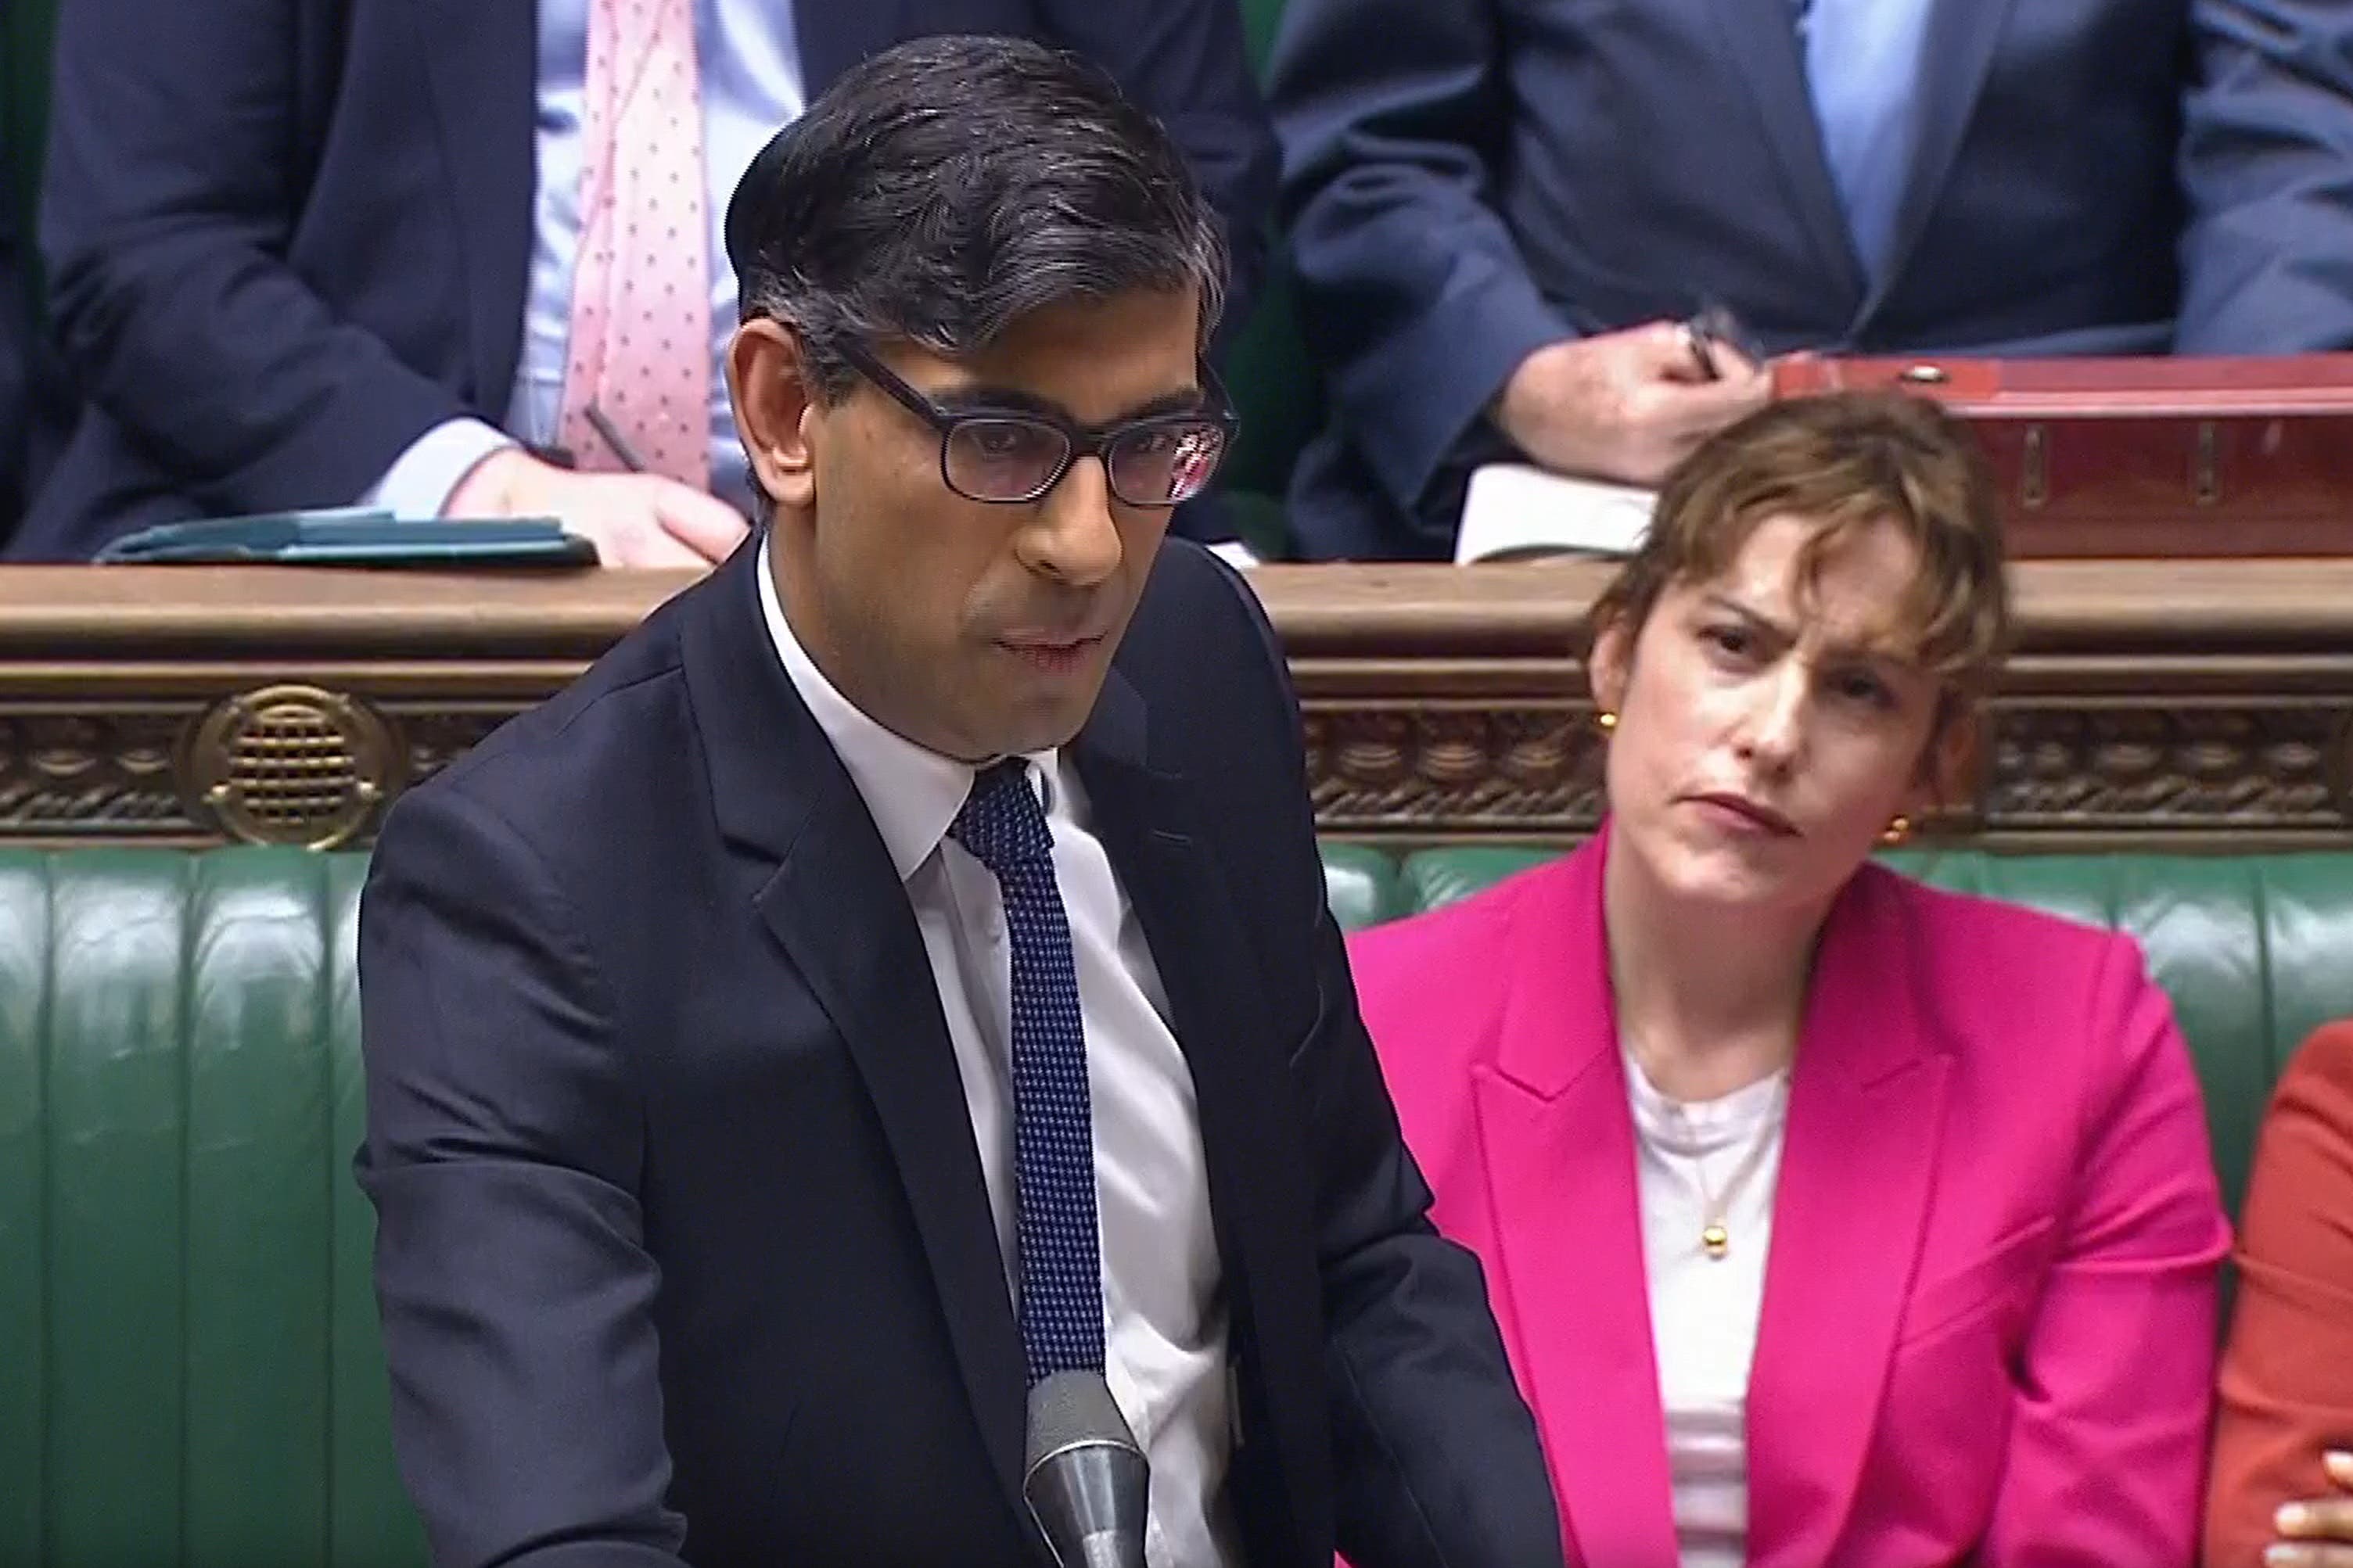 Rishi Sunak announced the cancellation of the northern leg of HS2 last year, citing spiralling costs